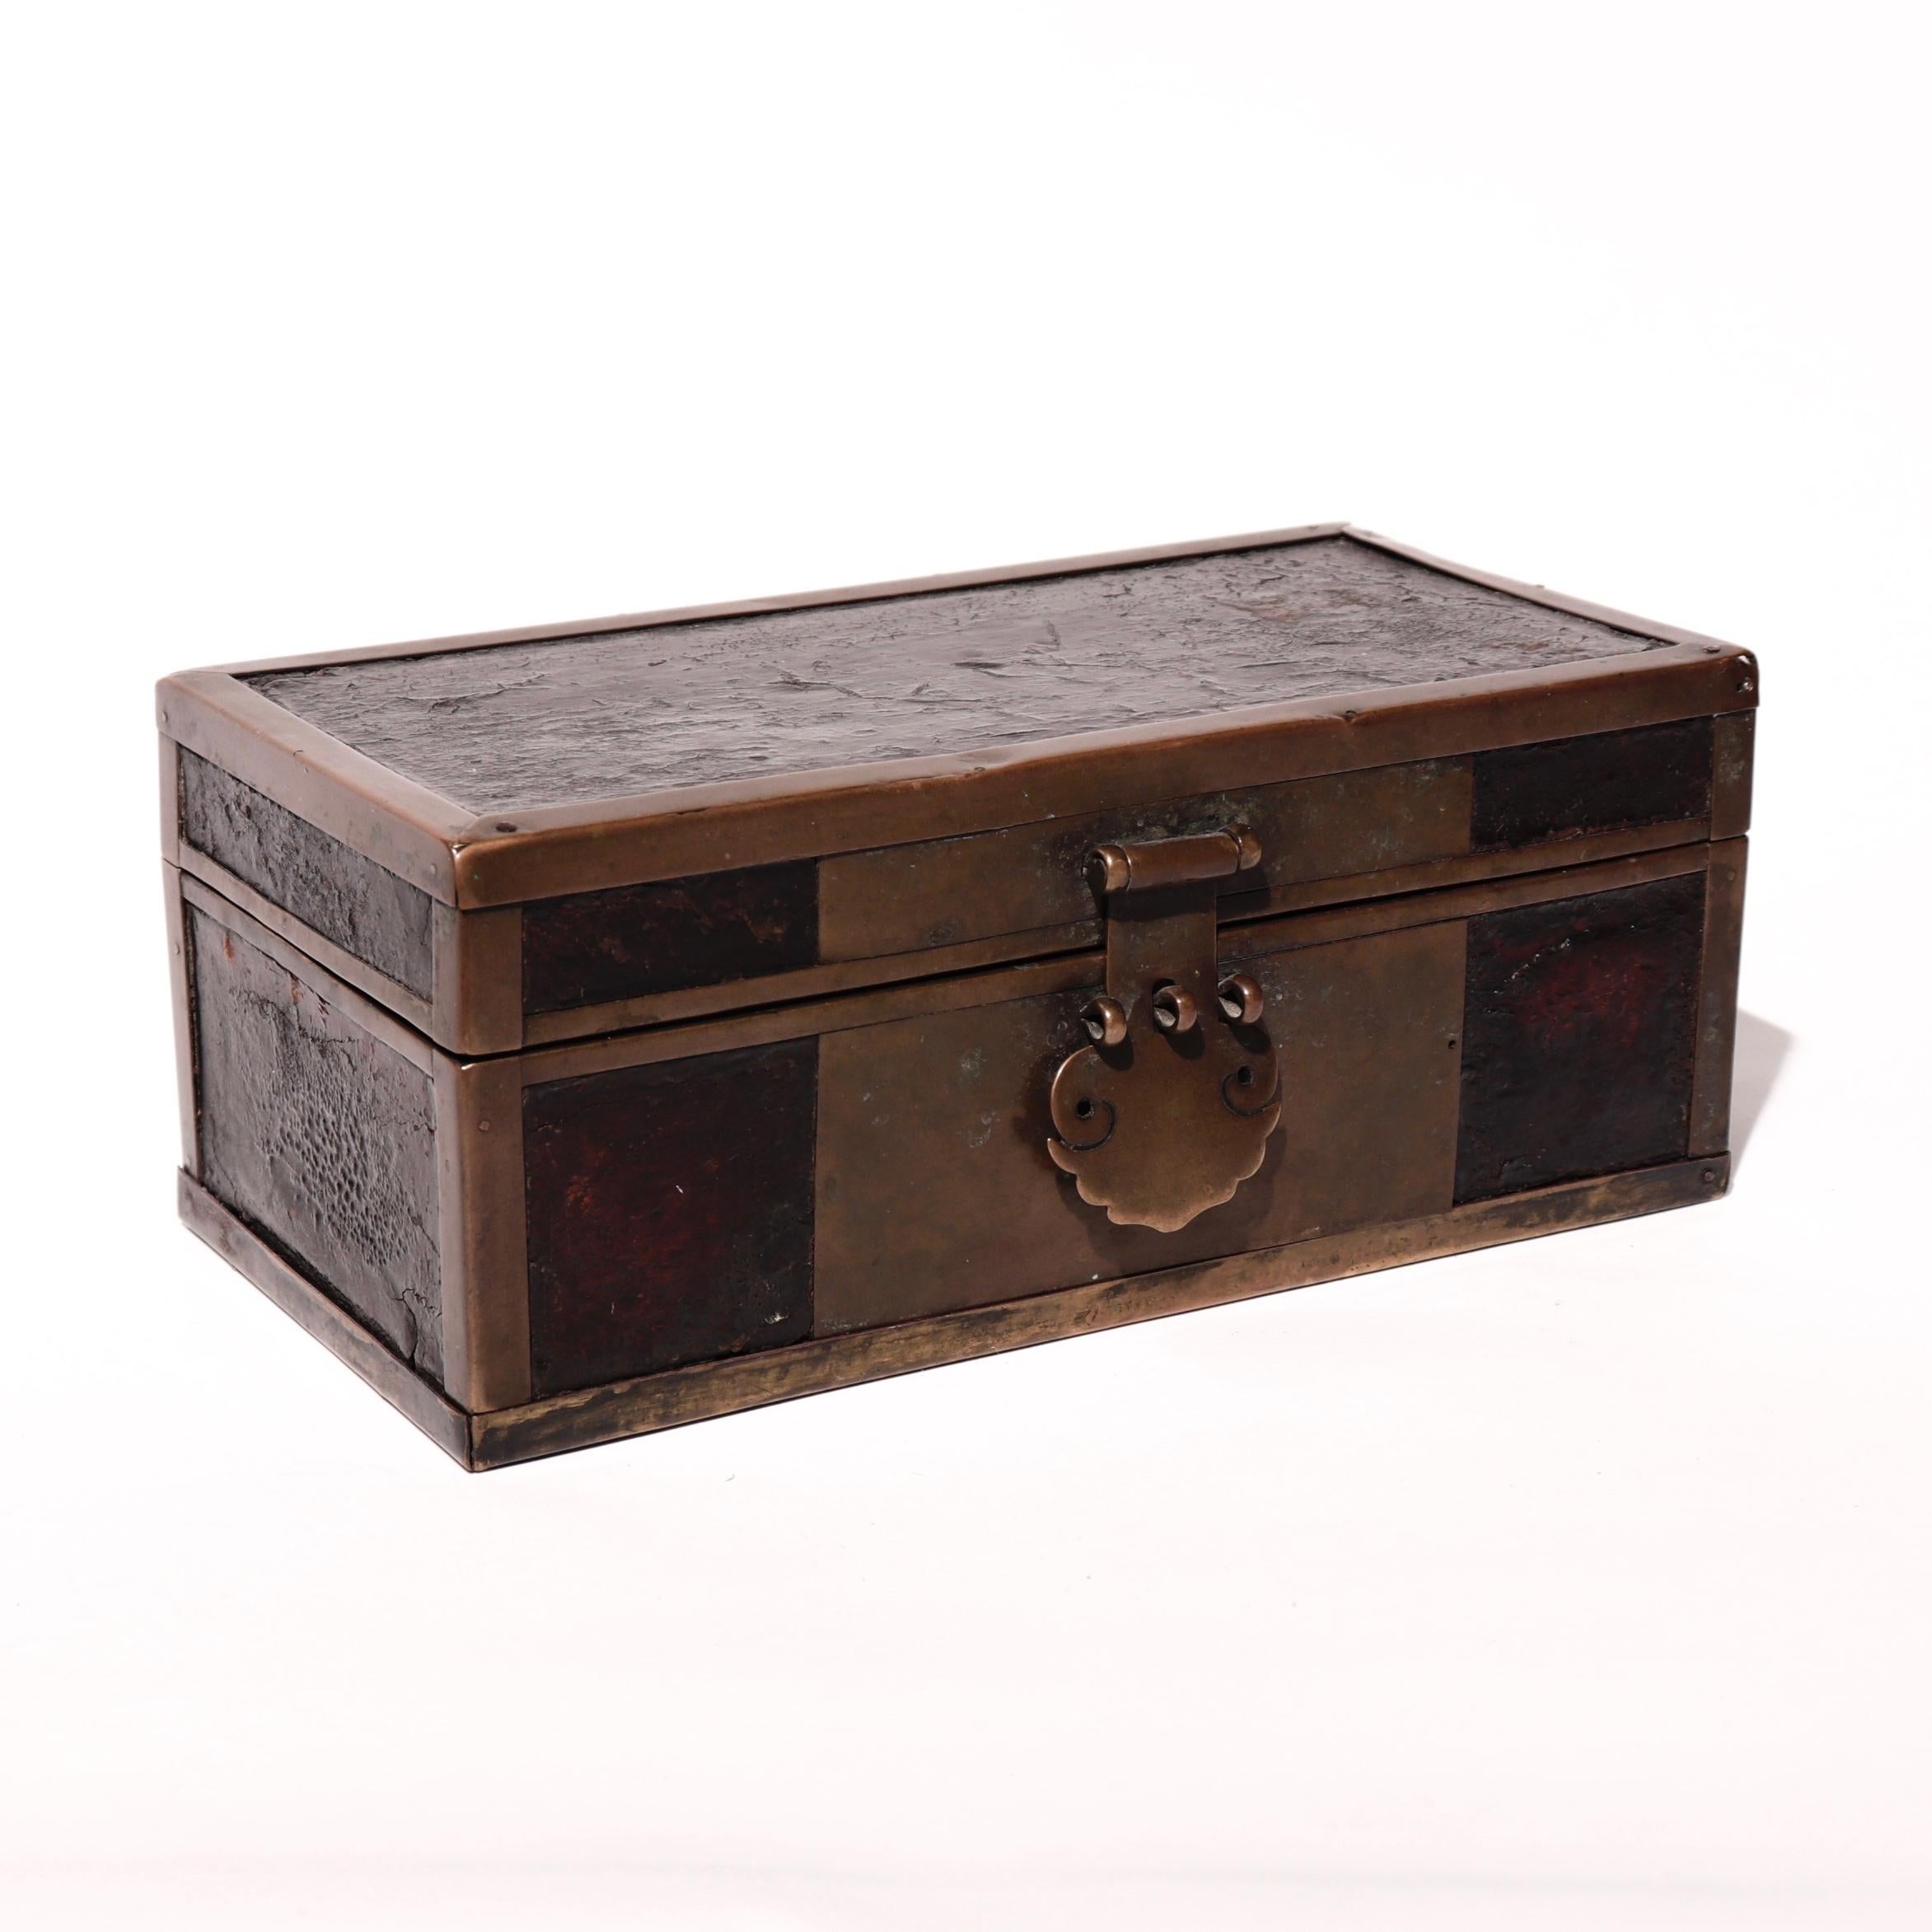 Chinese brass and lacquered wood document box, simple rectangular wood box with brass hardware edgings for protection and front lock plate, wood section covered in a dark lacquer, hinged top lid, front with large rectangular brass front plate with